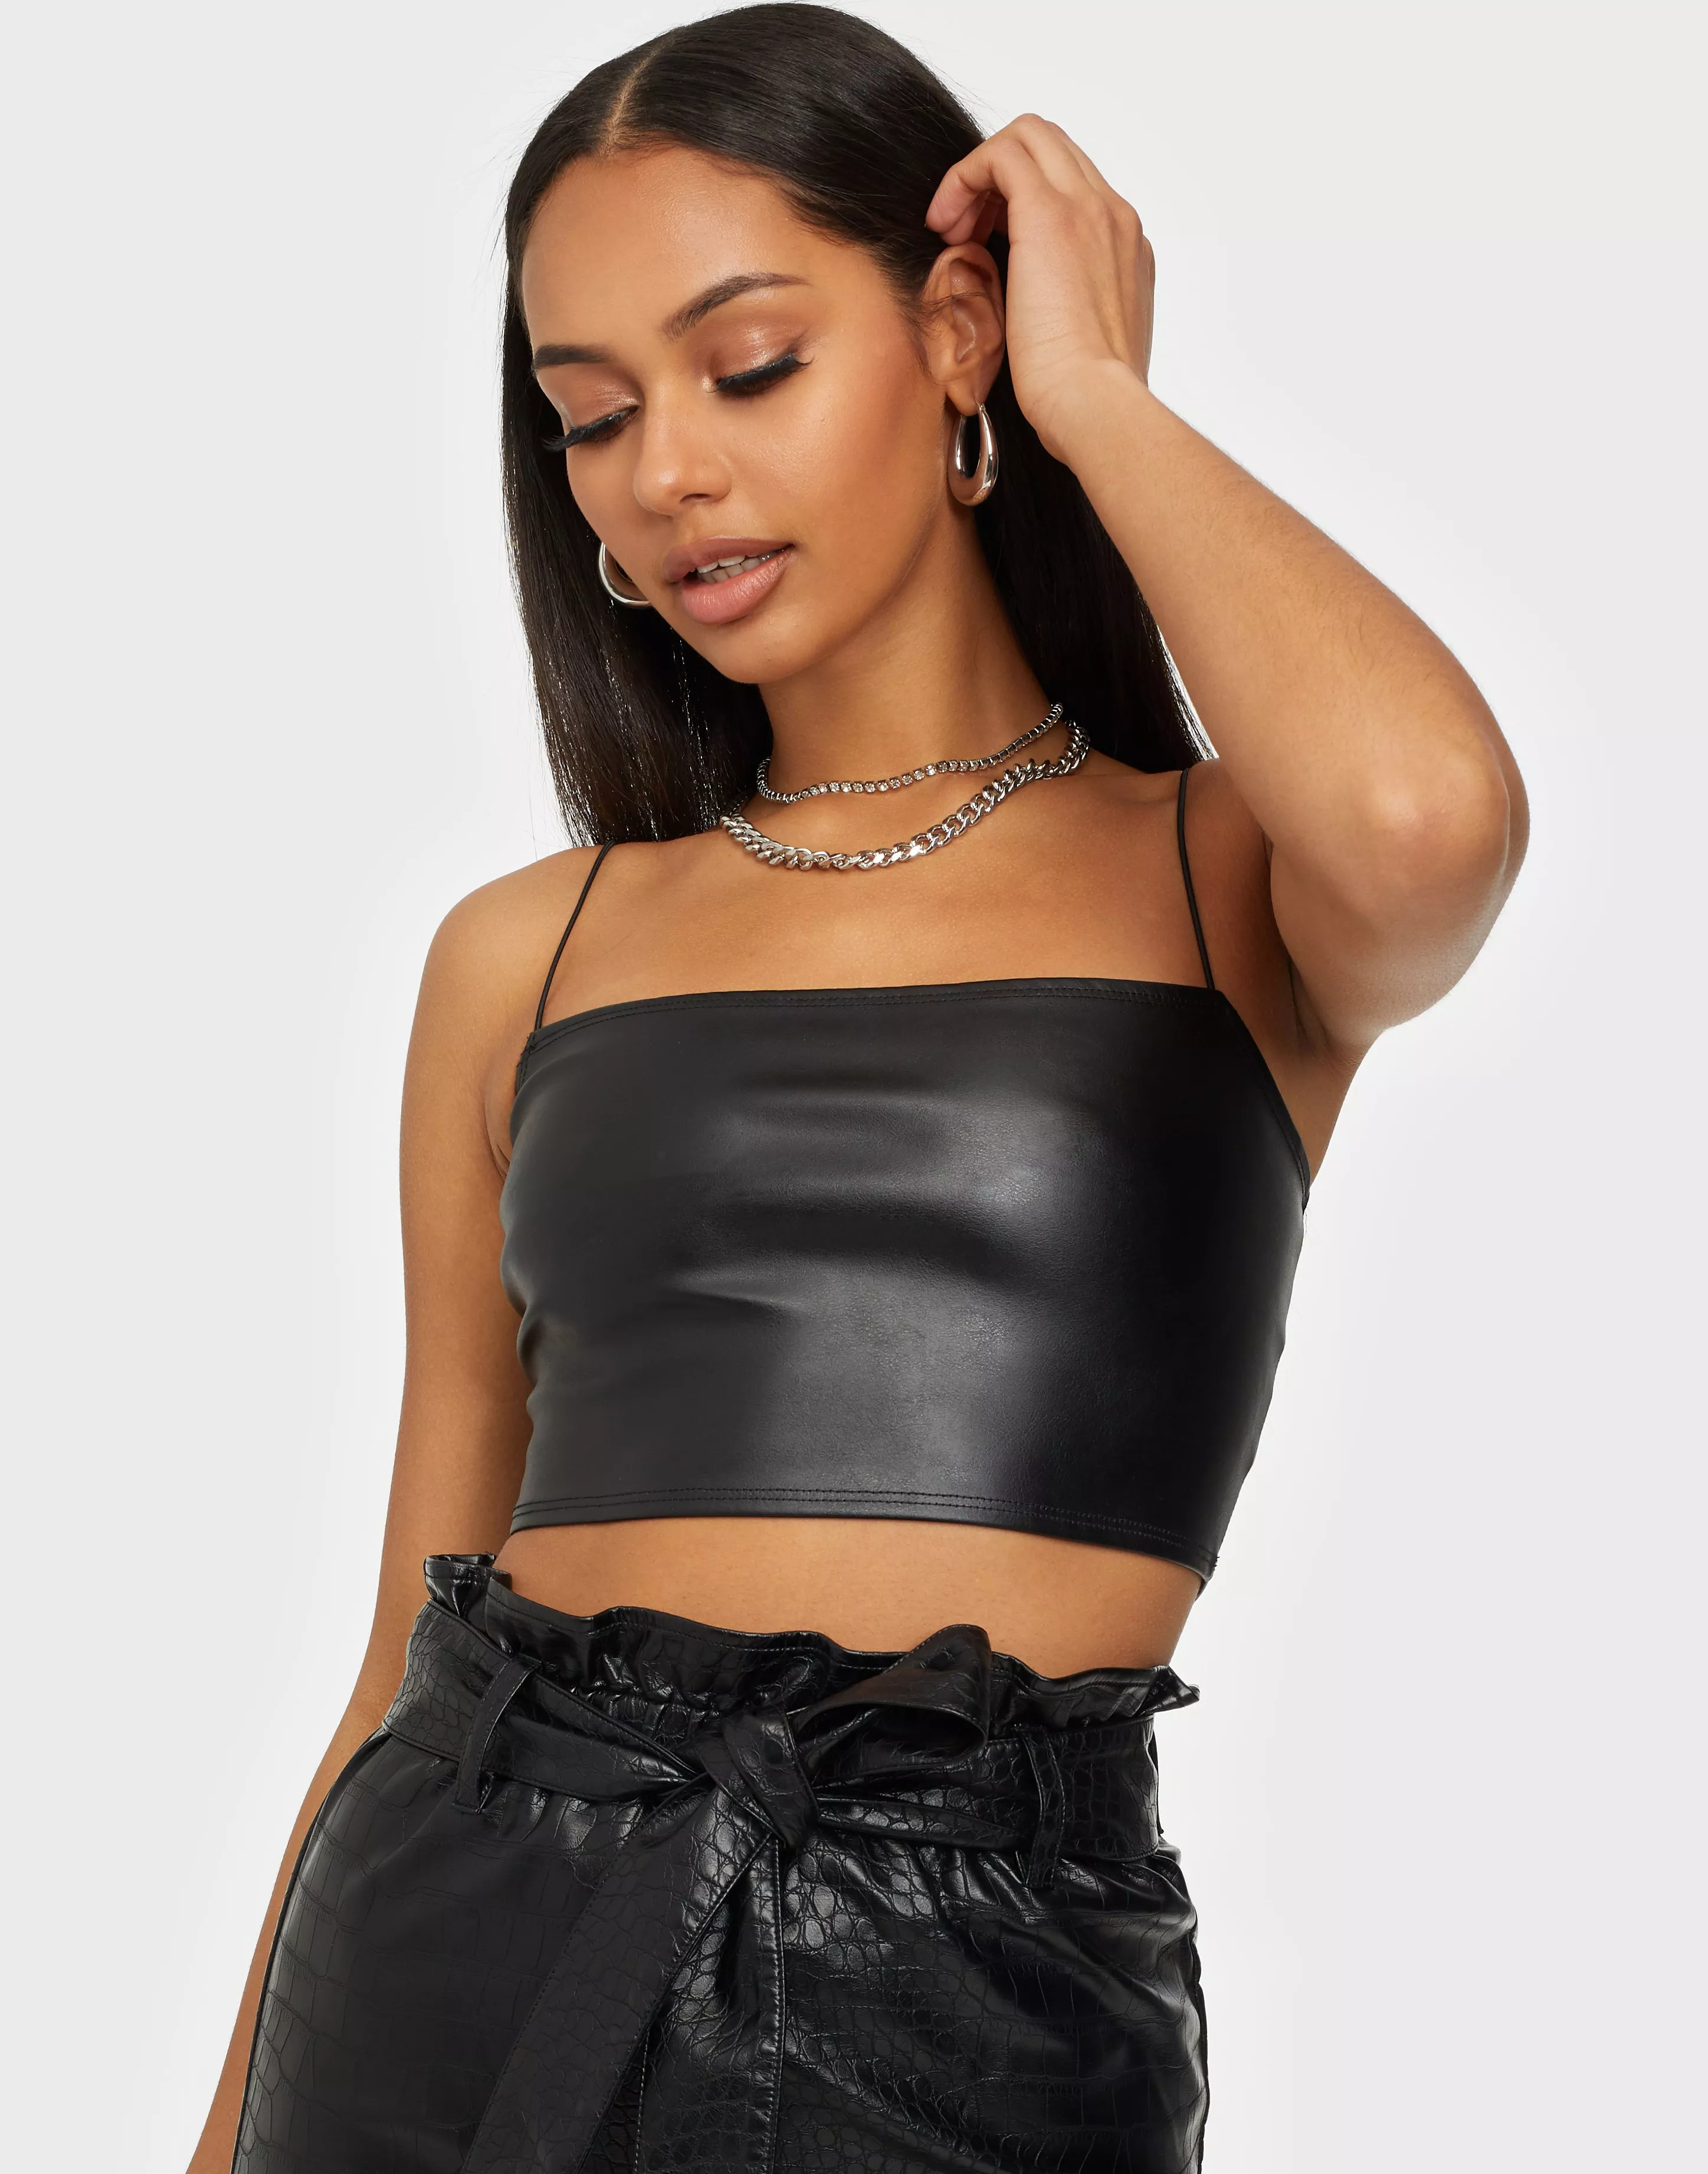 Buy Nelly Leather Look Strap Top - Black Nelly.com